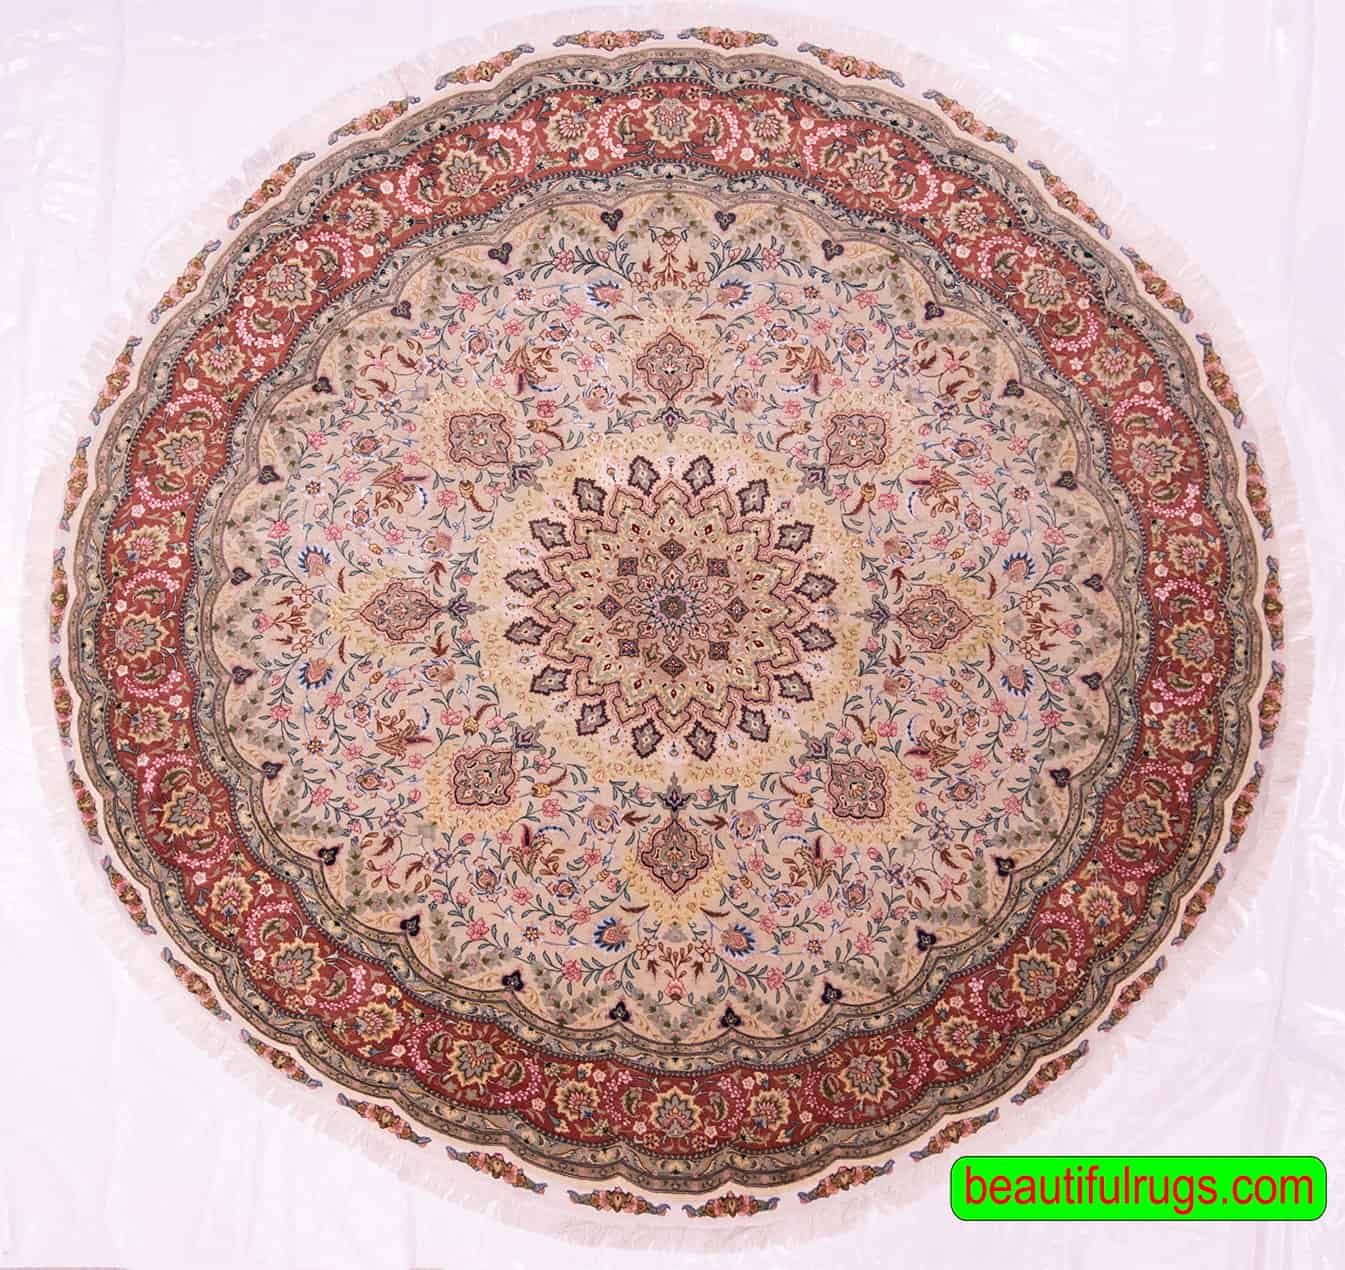 Round Persian rug made of wool and silk, Floral multicolor. Size 6.8x6.8